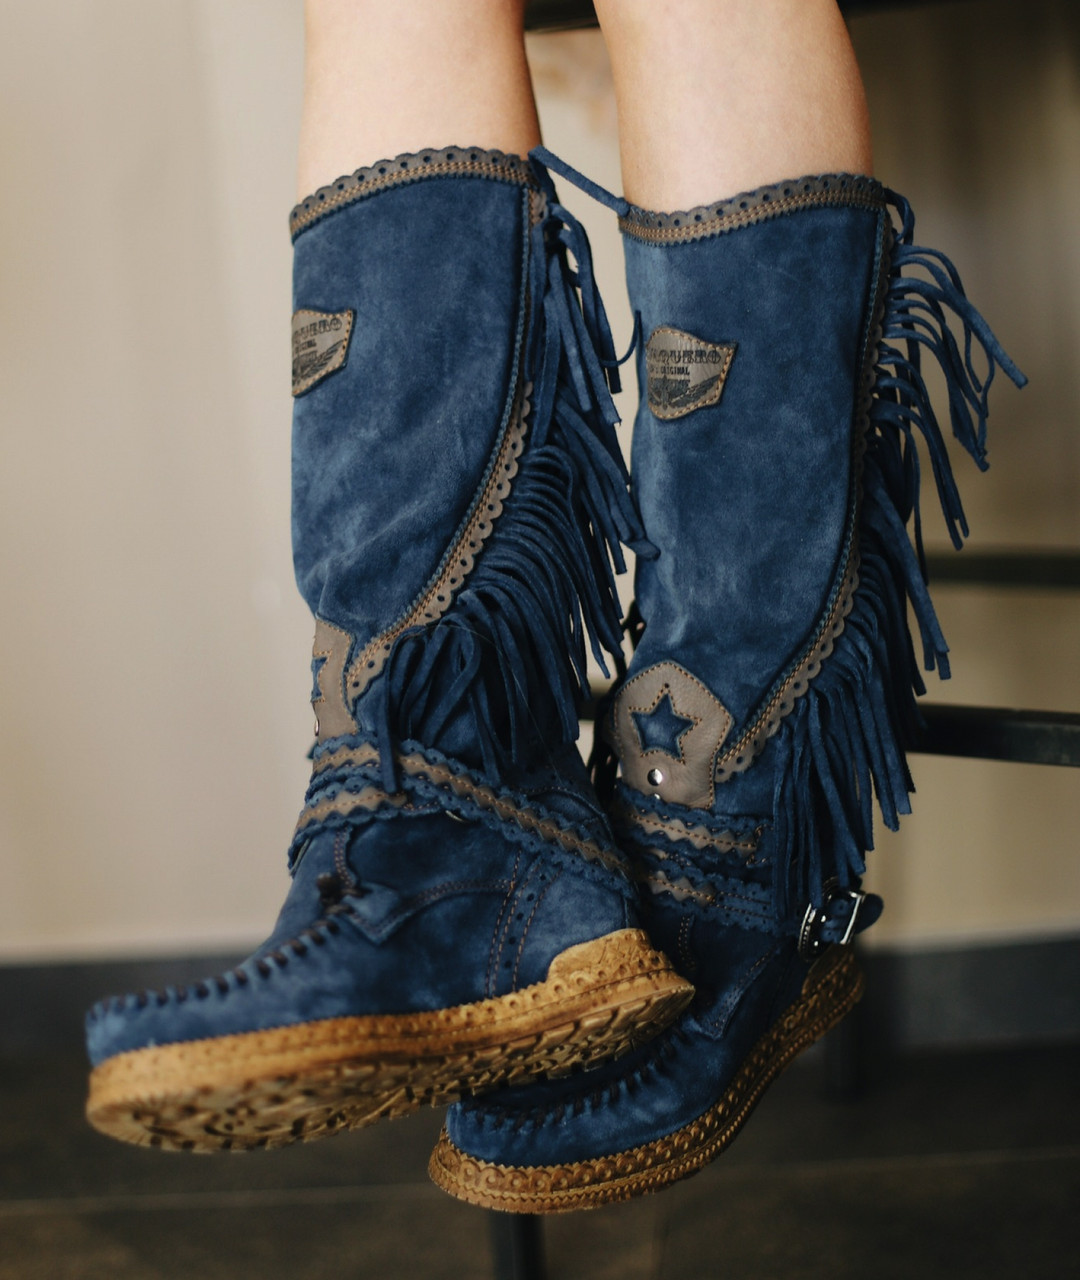 blue leather moccasins